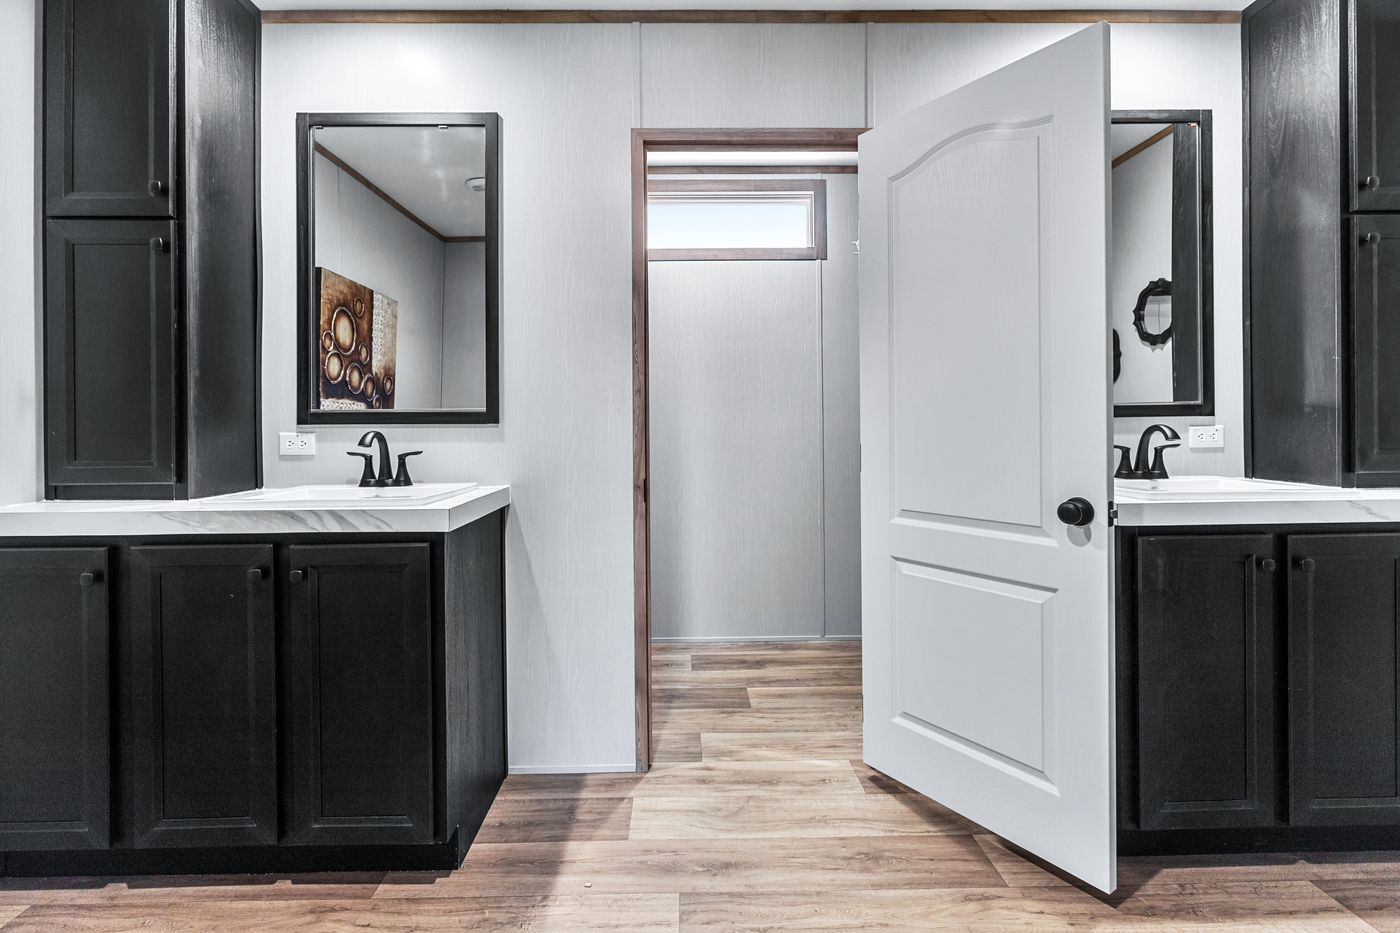 The ANATOLIA Primary Bathroom. This Manufactured Mobile Home features 3 bedrooms and 2 baths.